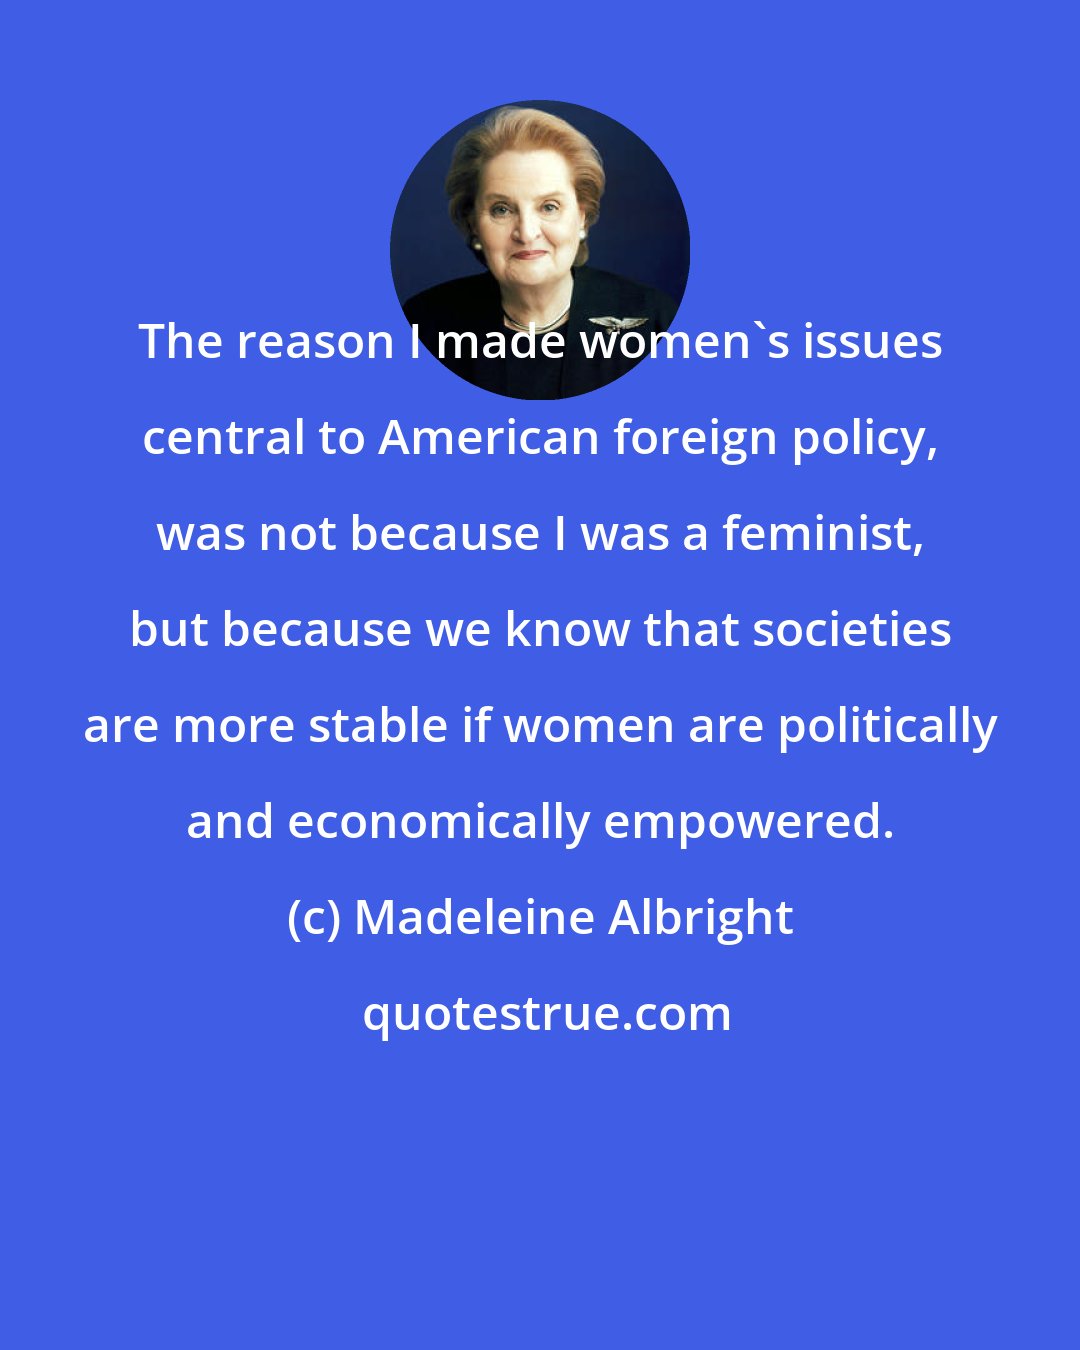 Madeleine Albright: The reason I made women's issues central to American foreign policy, was not because I was a feminist, but because we know that societies are more stable if women are politically and economically empowered.